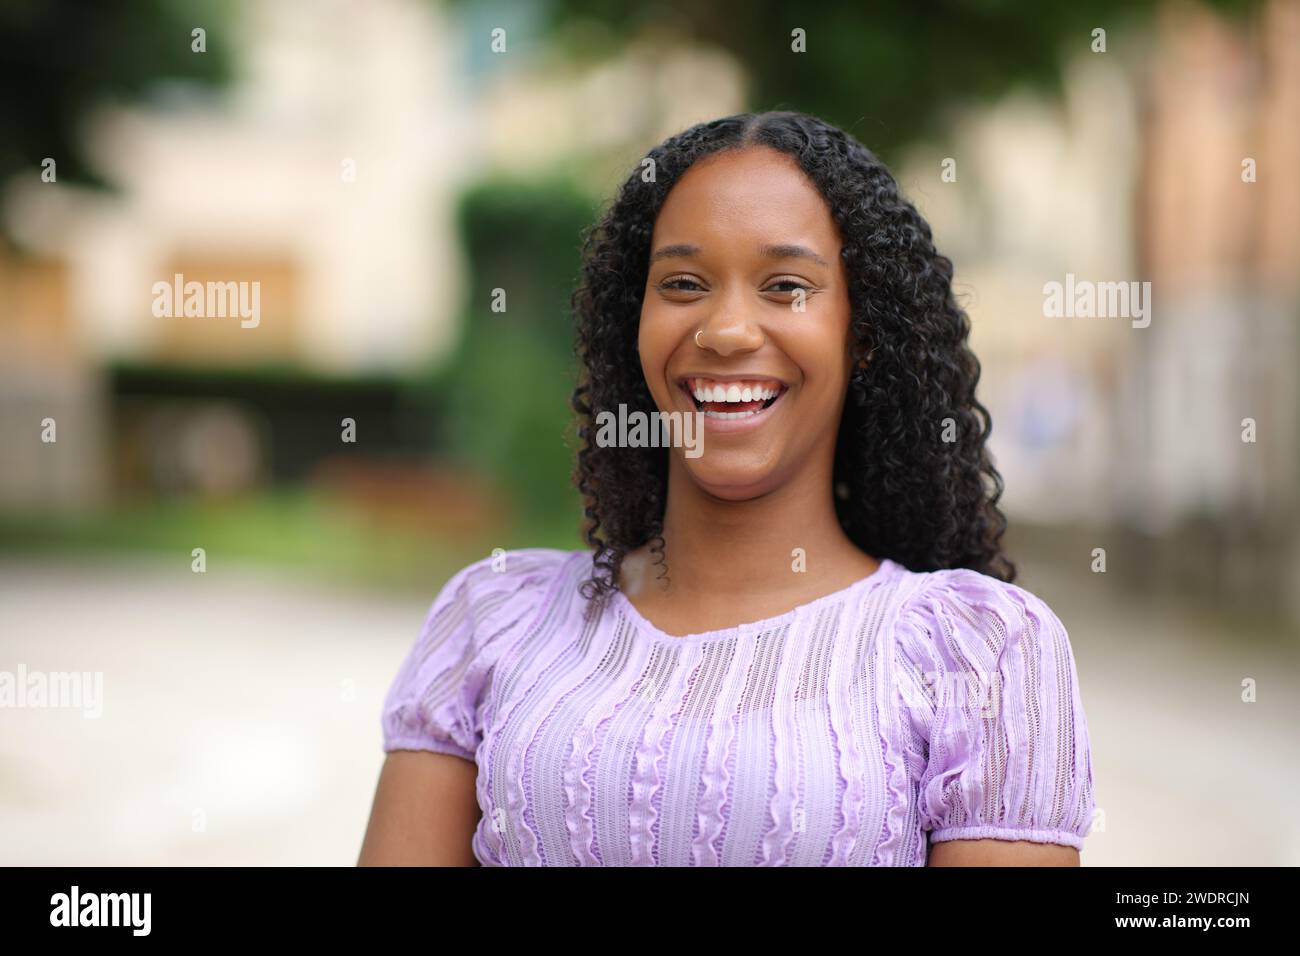 Front view portrait of a beautiful black woman with perfect teeth laughing at camera in the street Stock Photo